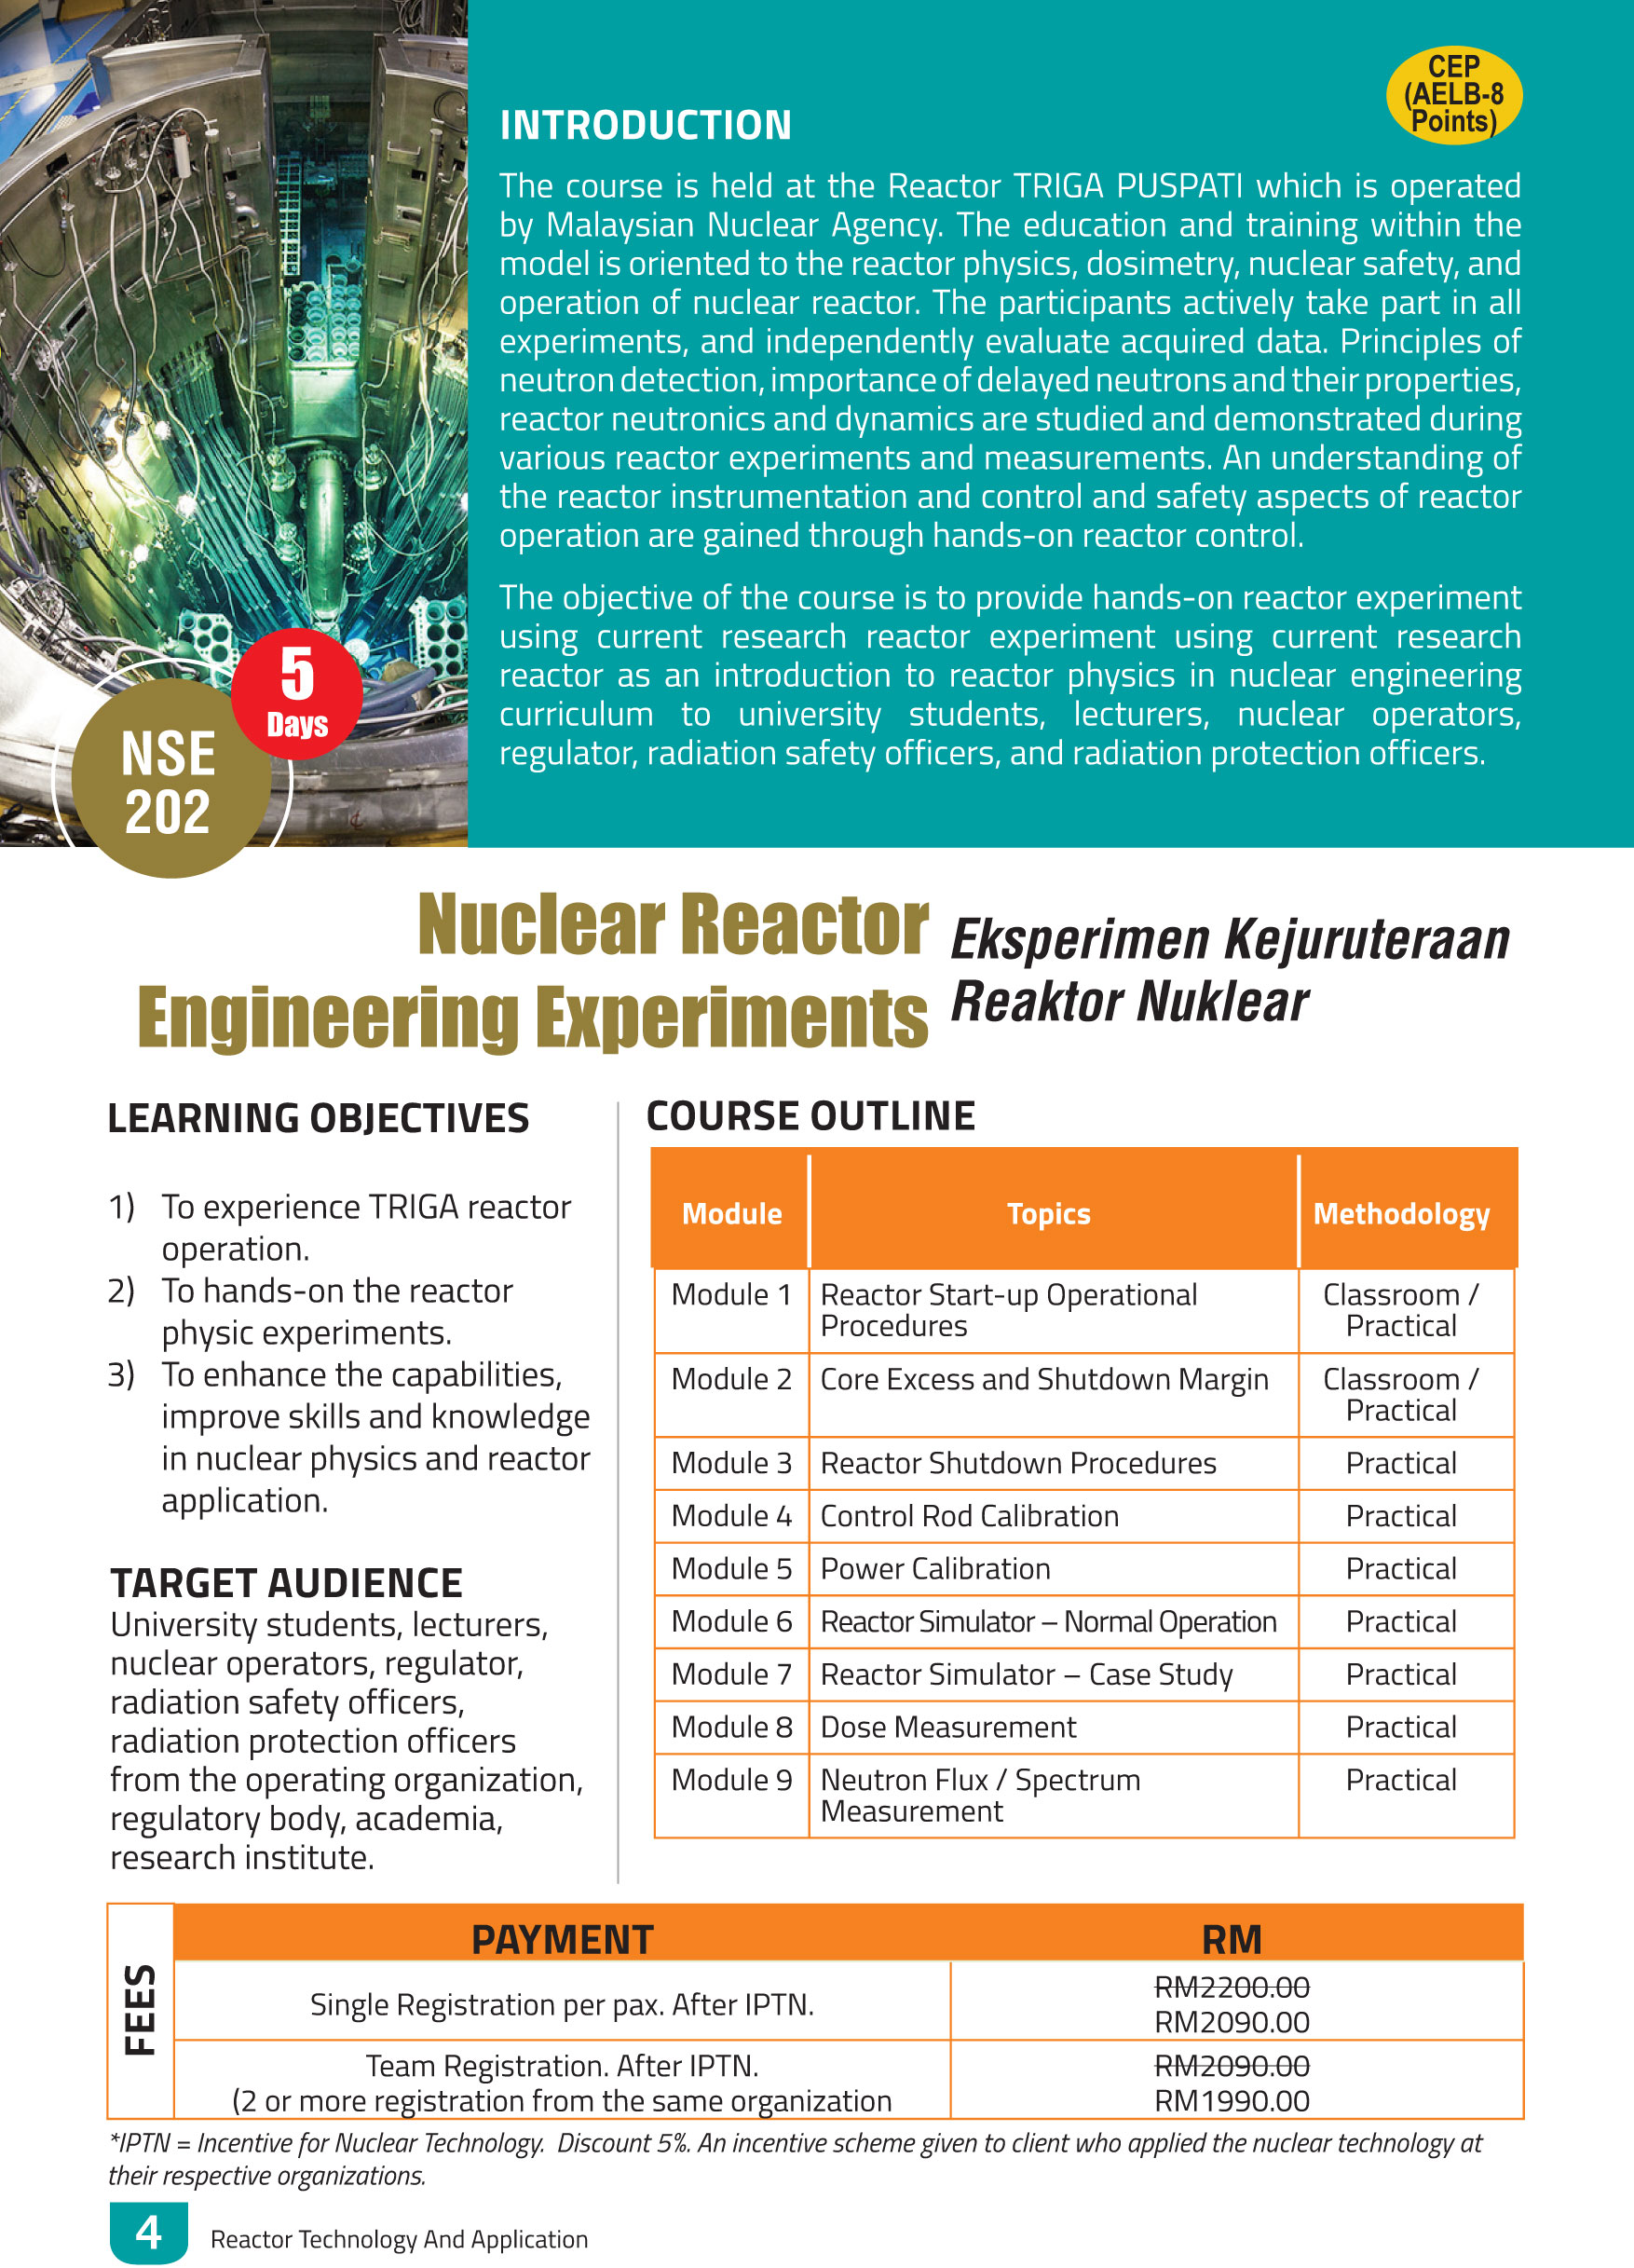 NSE 202: Nuclear Reactor Engineering Experiments